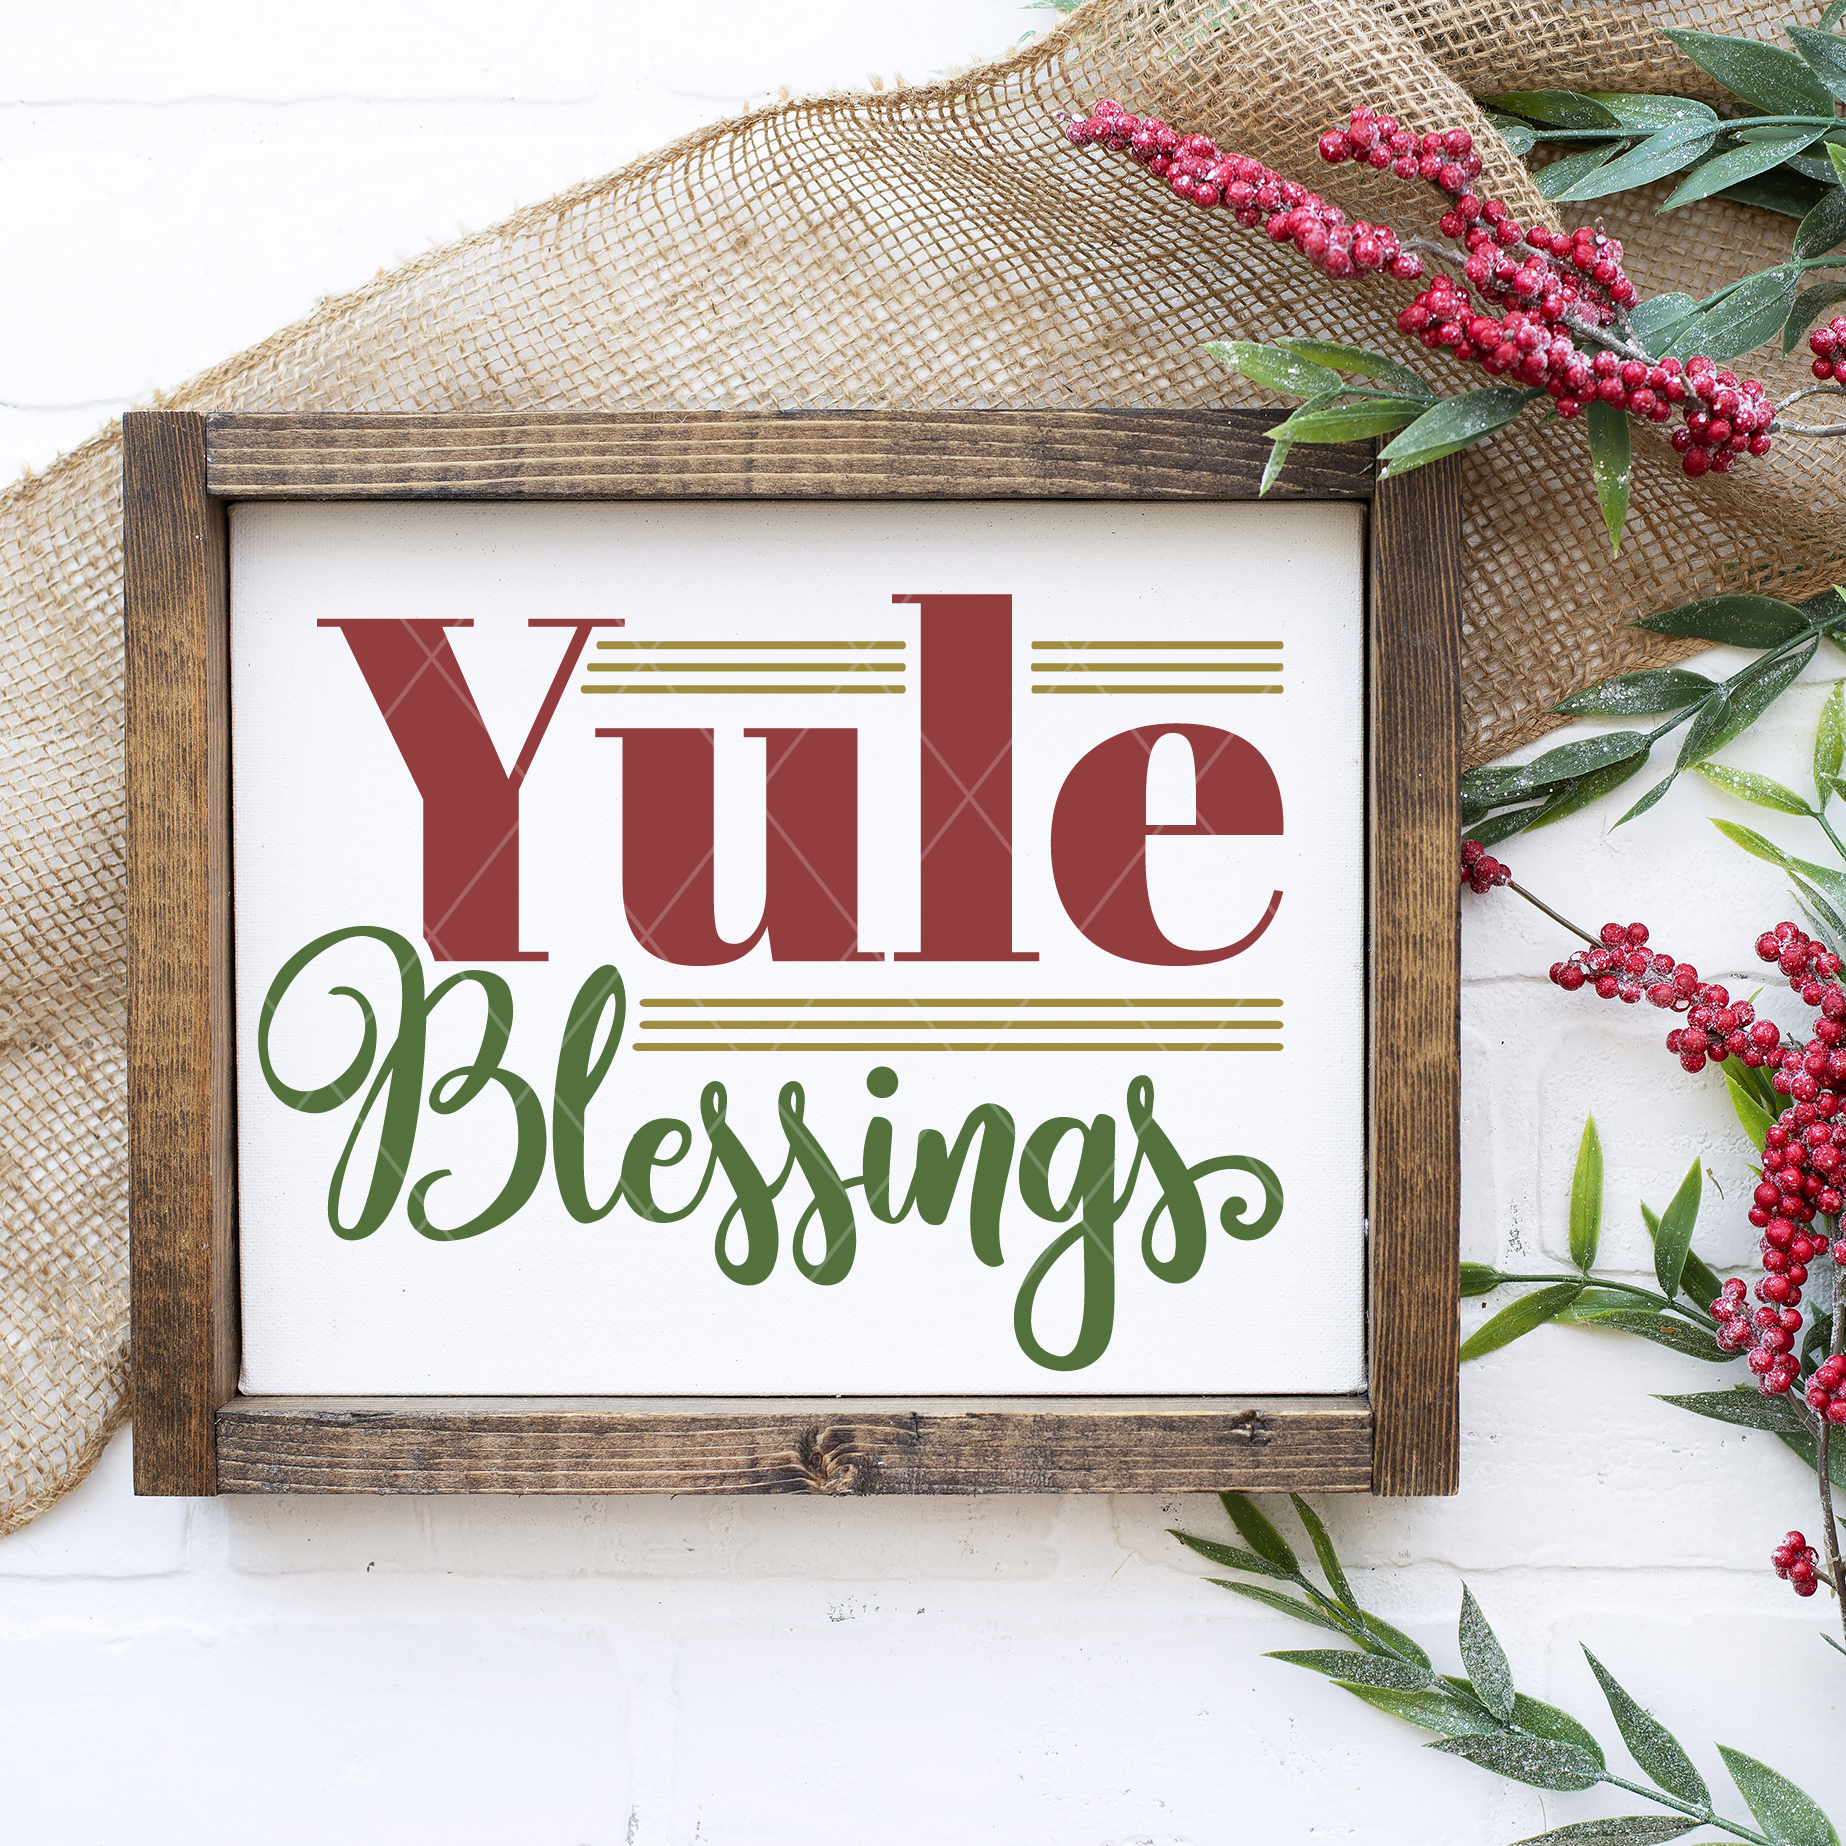 Yule Blessings SVG File for Yuletide - Christmas Cricut Designs - Silhouette Cameo, Glowforge files - Commercial Use SVG Files for Cricut & Silhouette